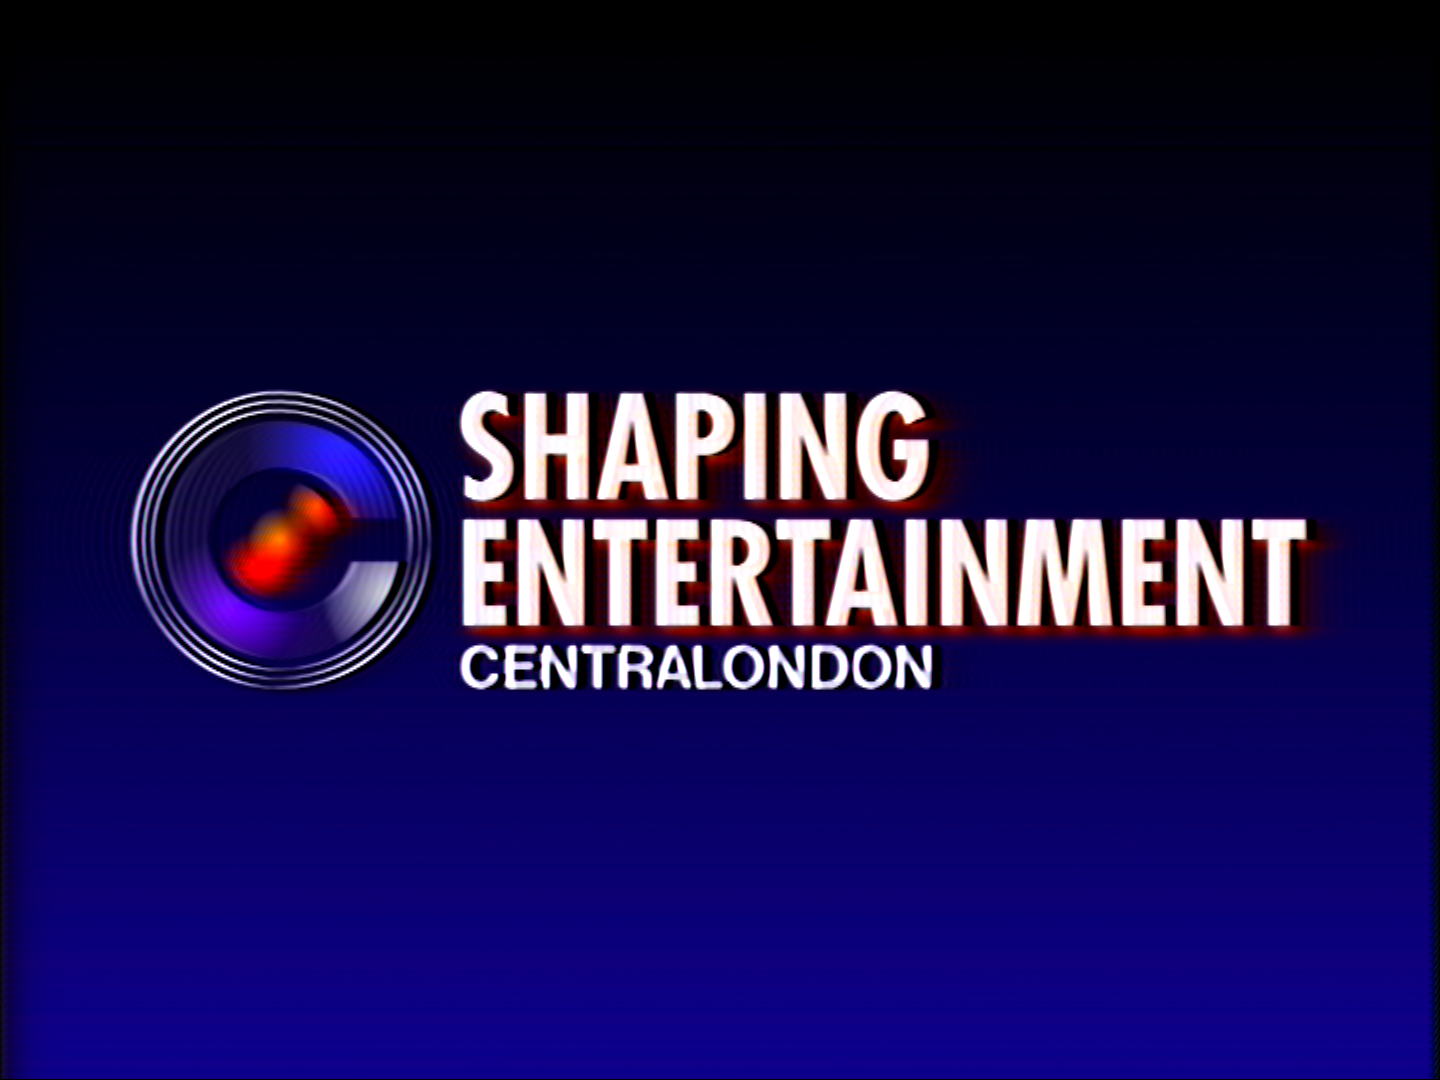 Central London promo ident (1985)